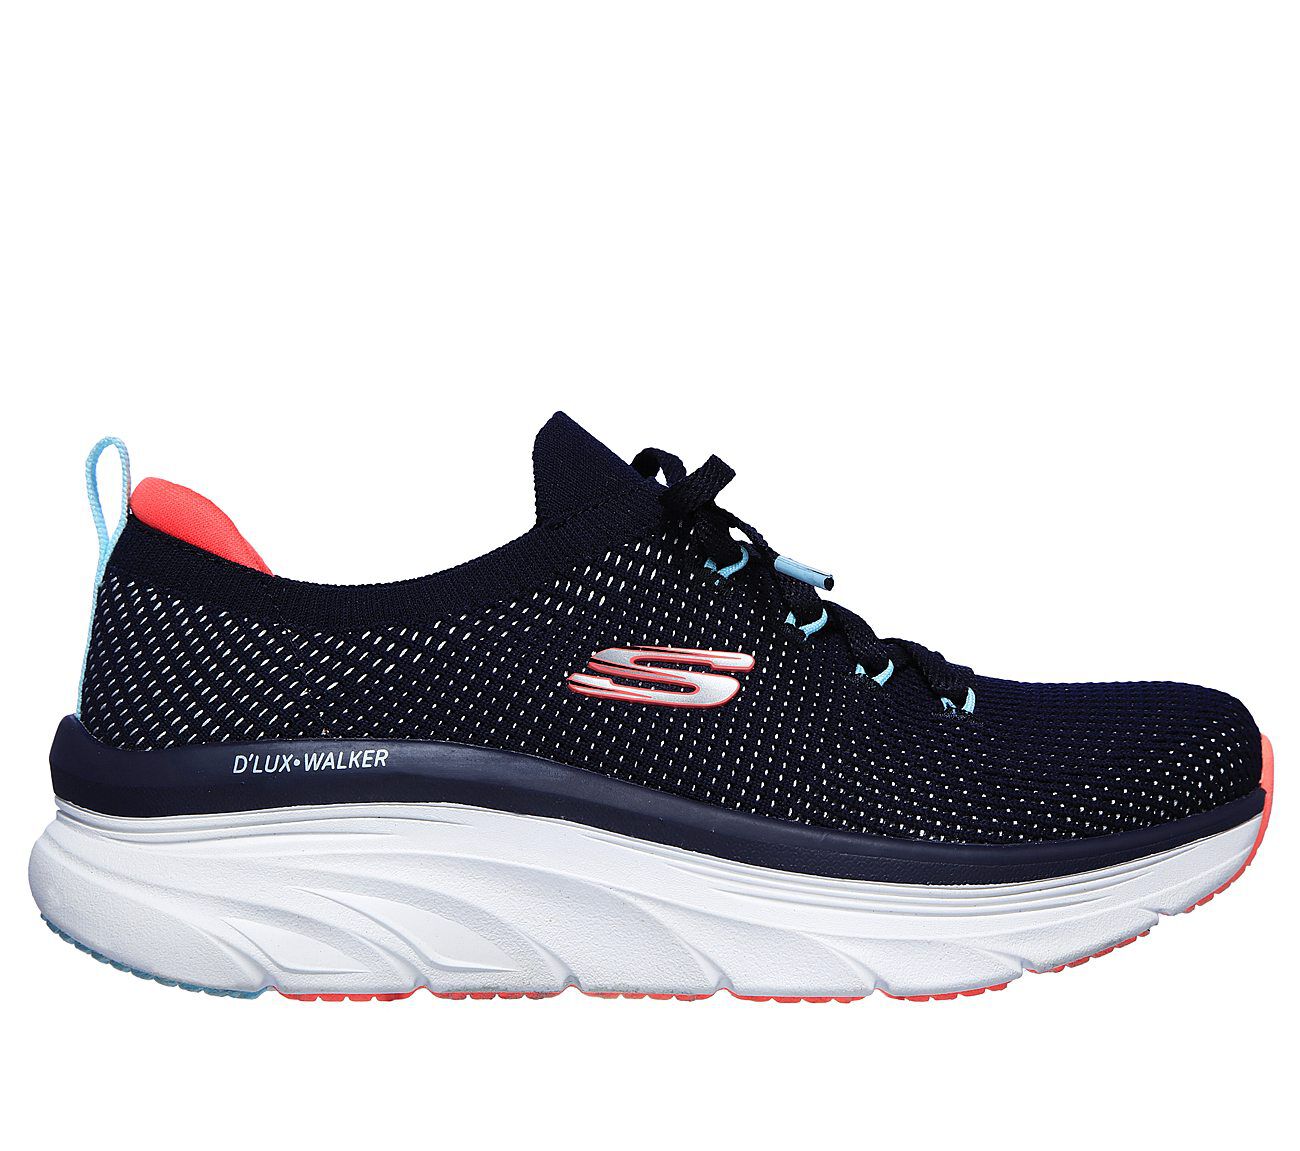 skechers relaxed air cooled memory foam